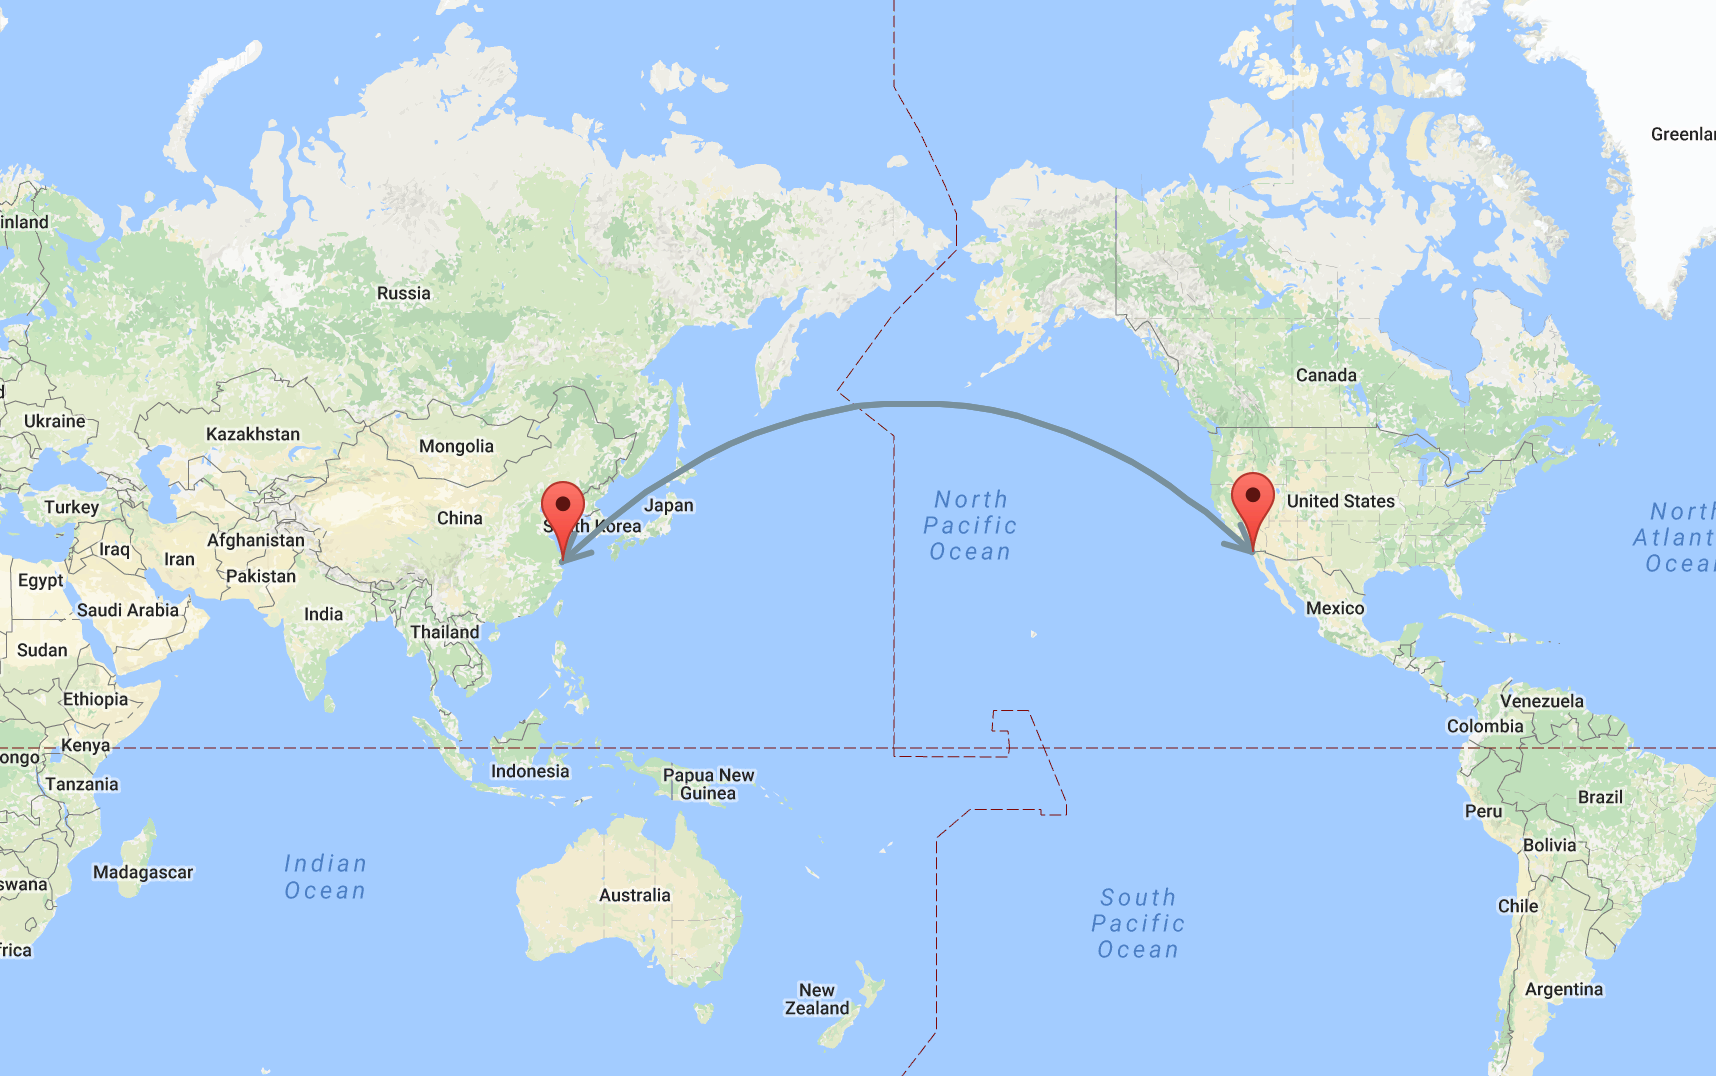 Australia To Argentina Flight Path : Useful information for your flight